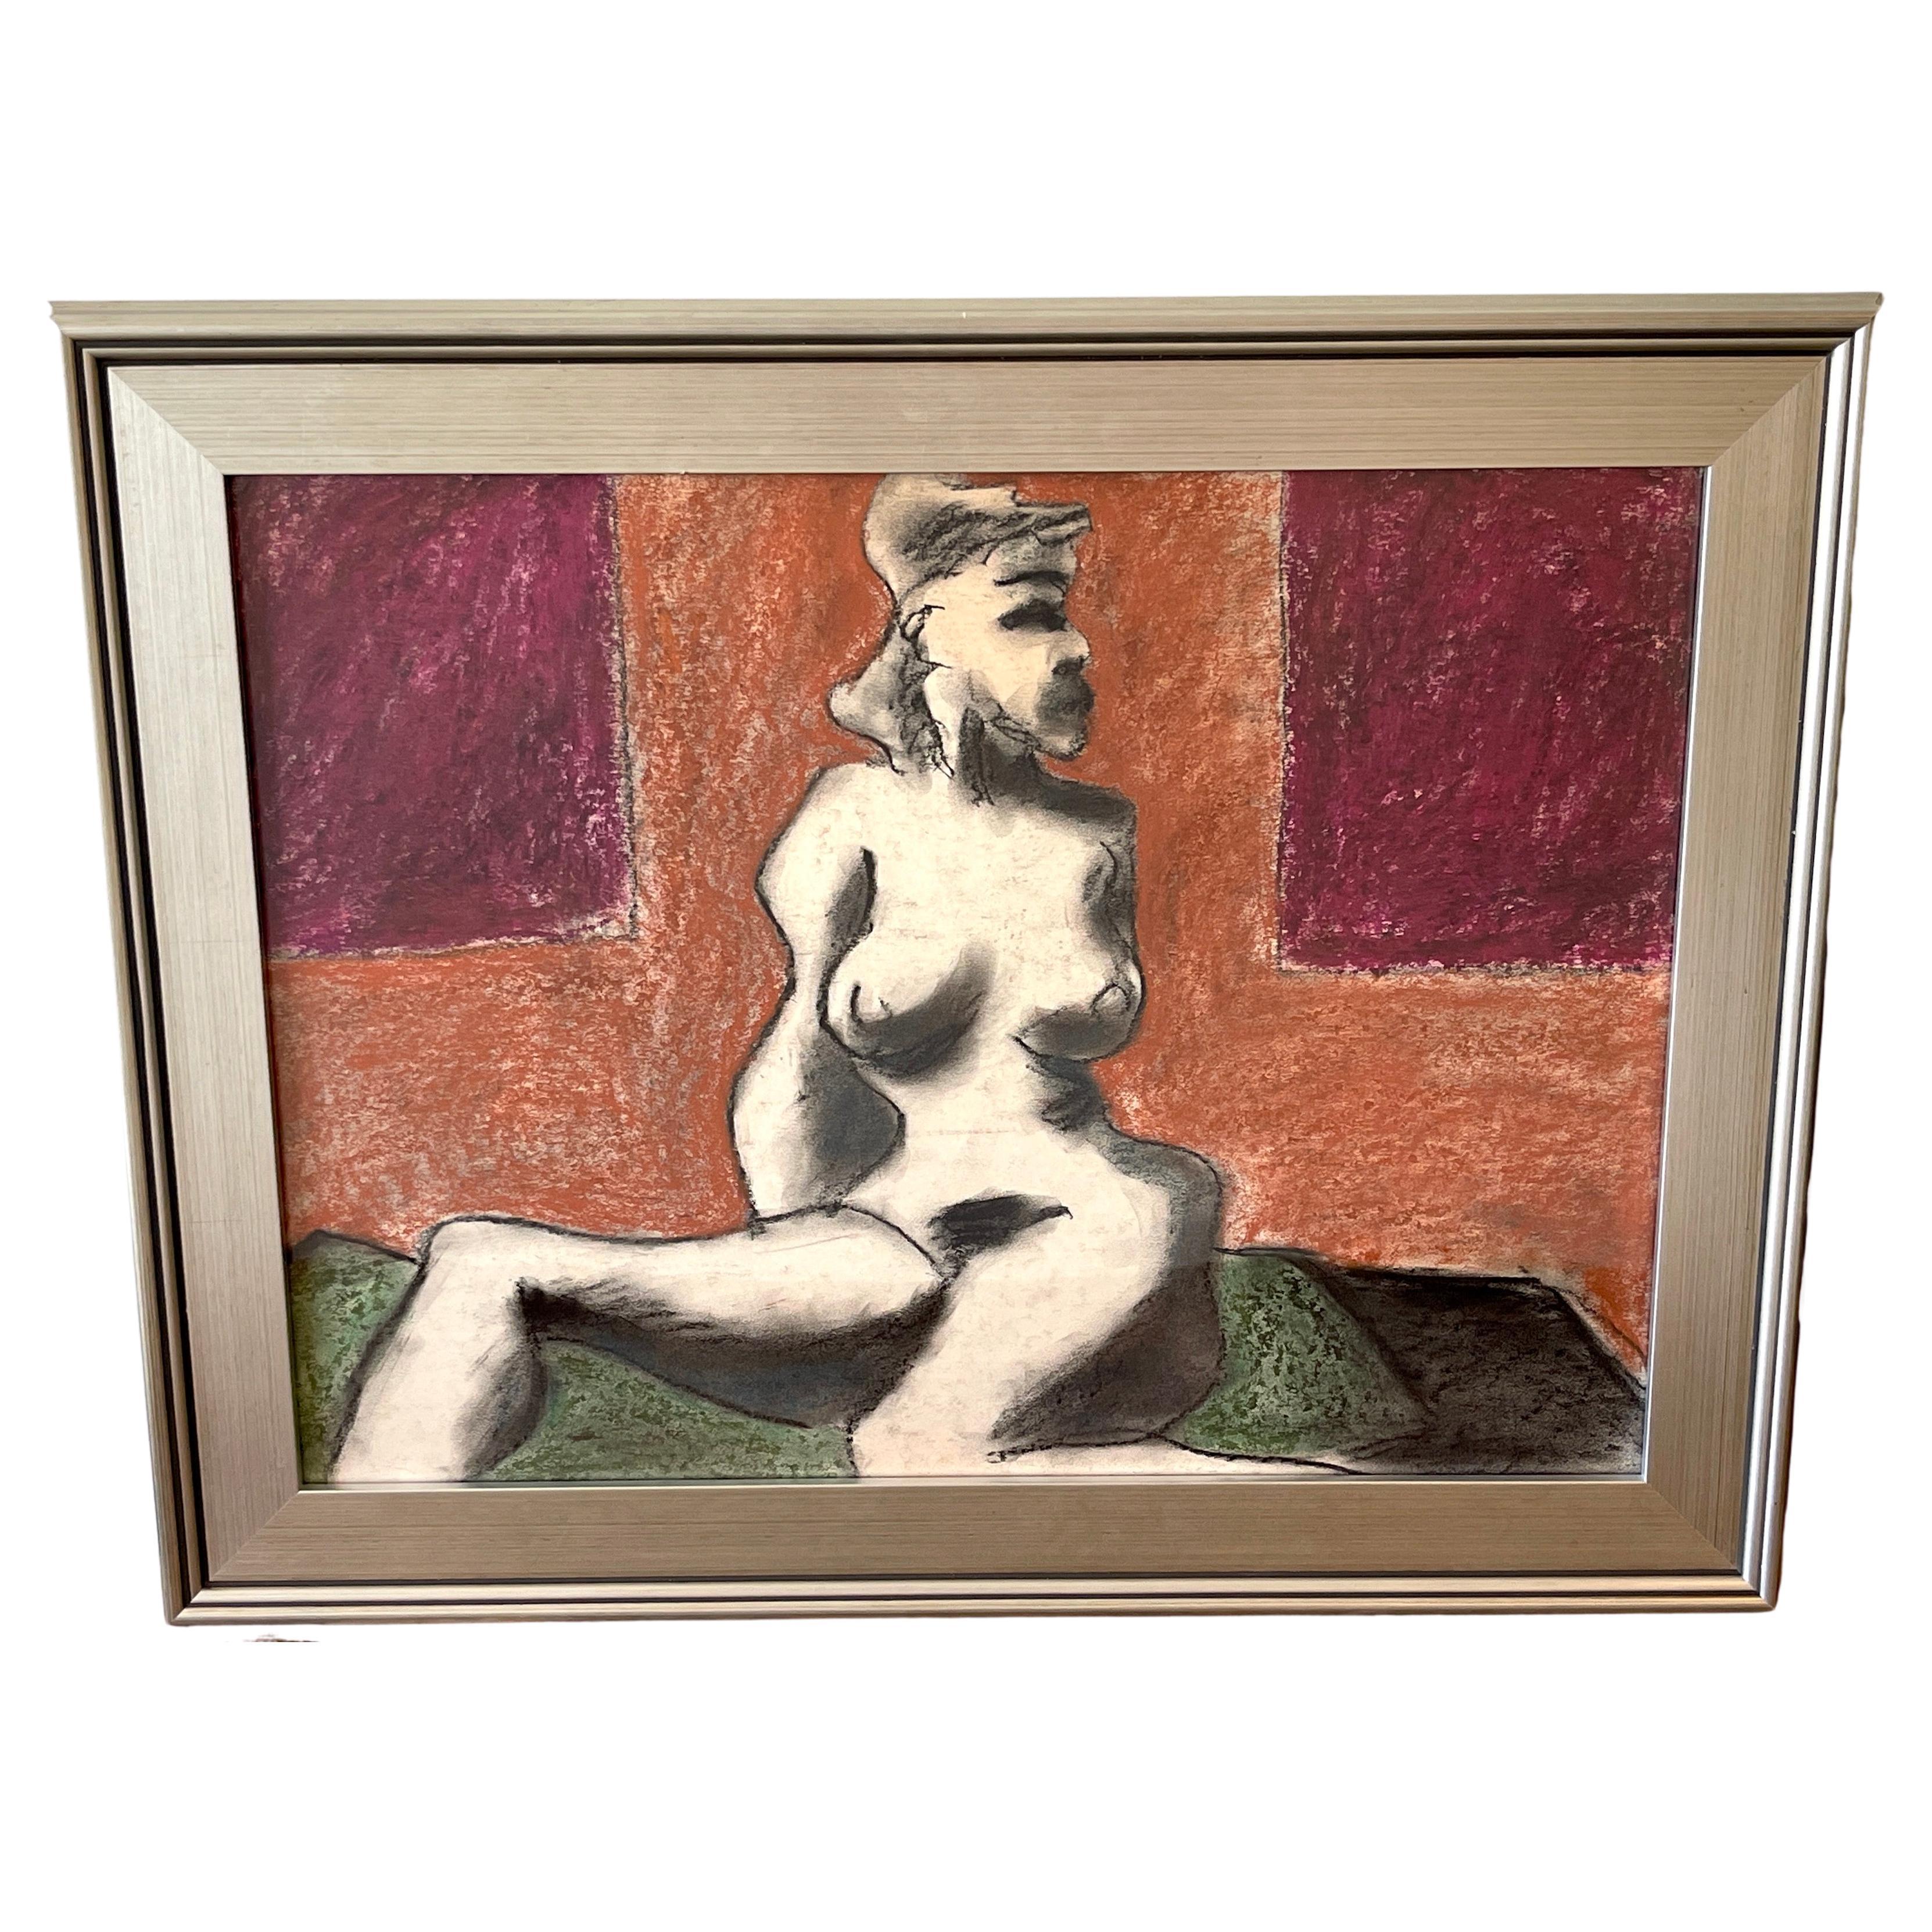 'Seated Female Nude' Oil/Mixed Media on Paper, 1960s by Douglas D. Peden For Sale